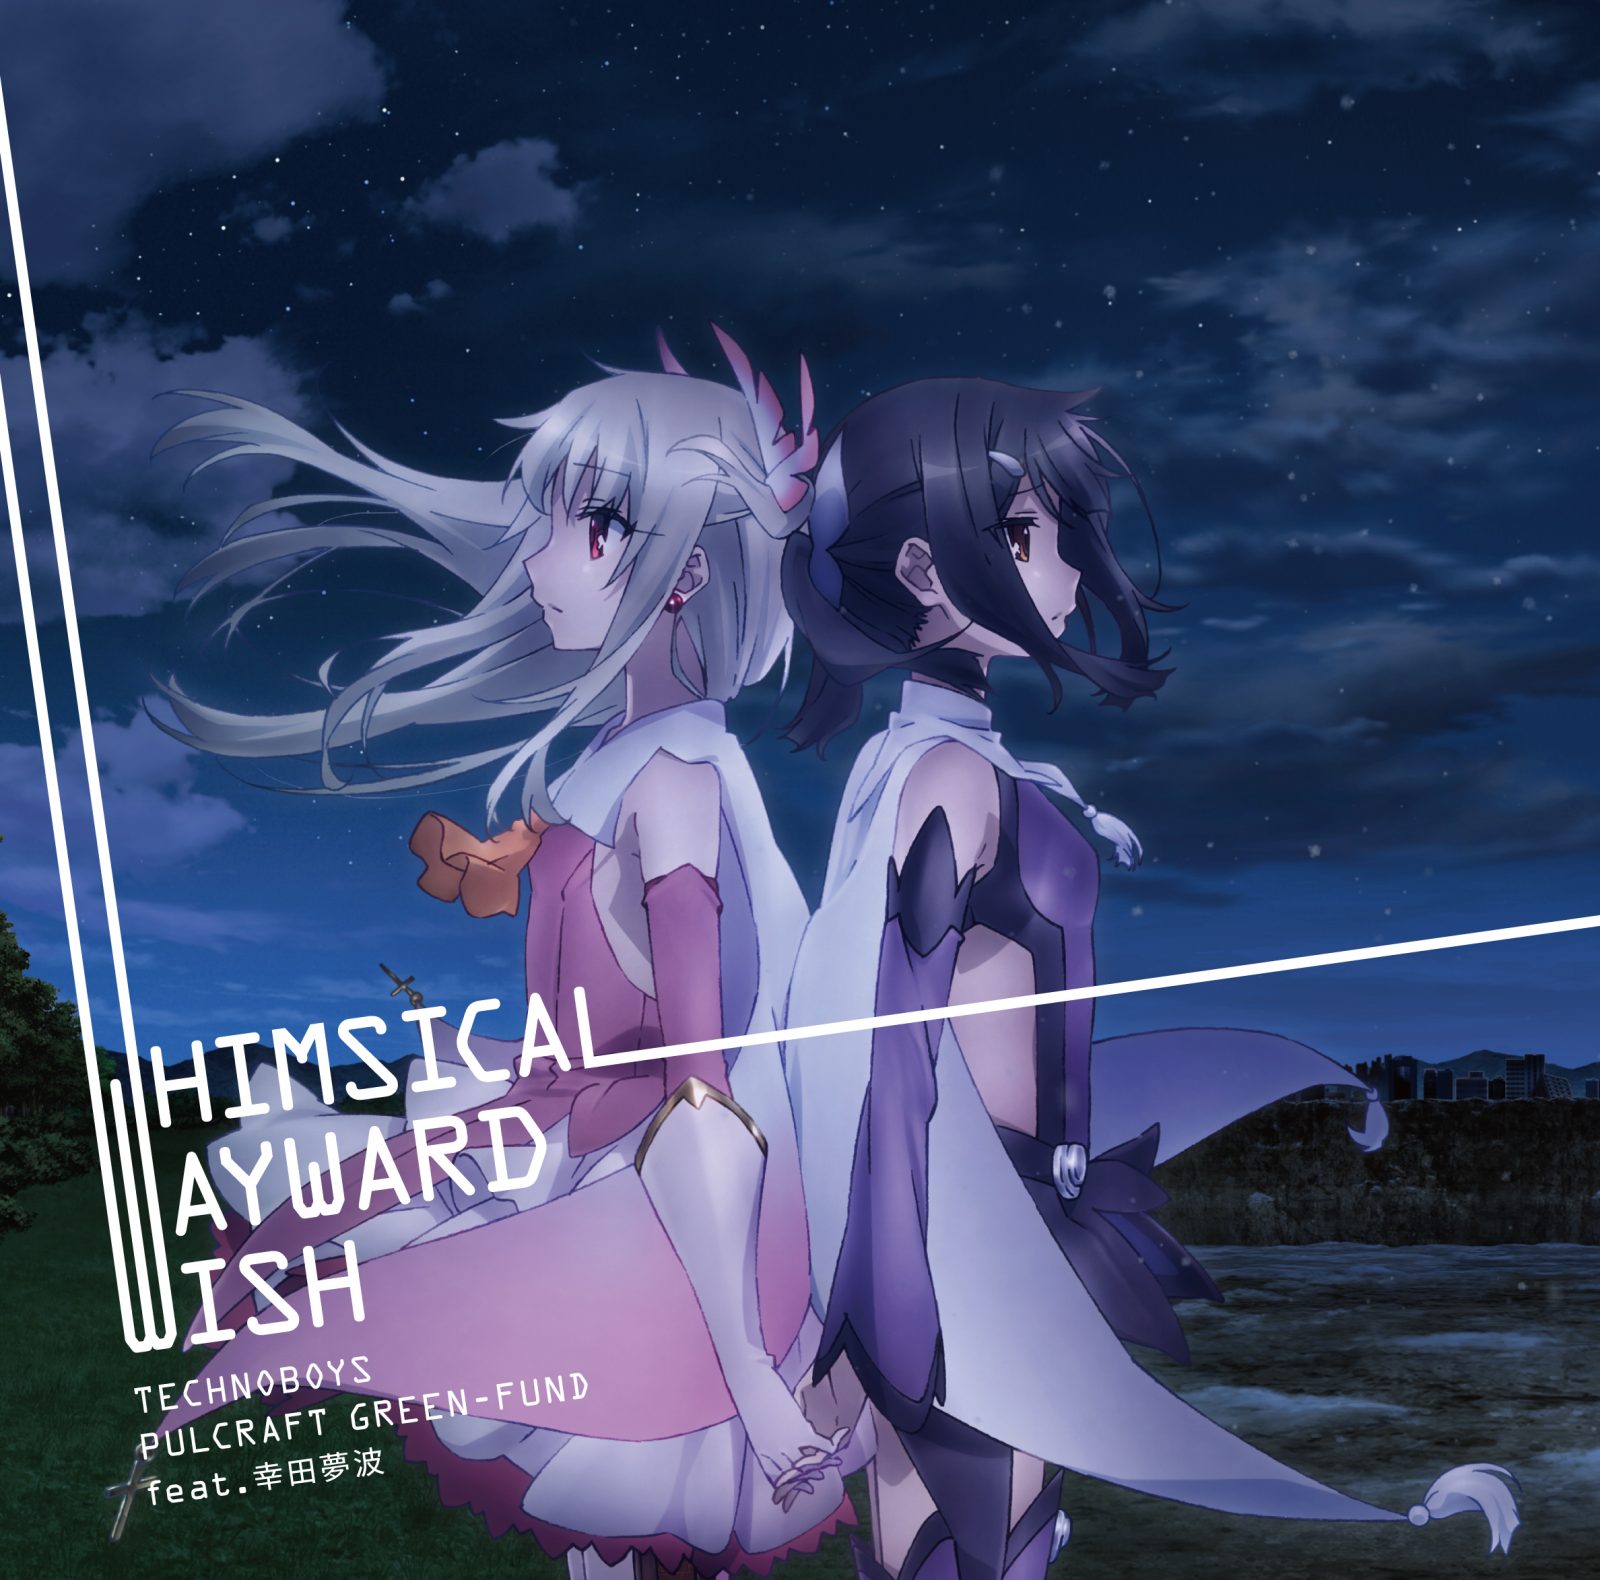 TECHNOBOYS PULCRAFT GREEN-FUND feat. 幸田夢波「WHIMSICAL WAYWARD WISH」レビュー - 画像一覧（1/2）